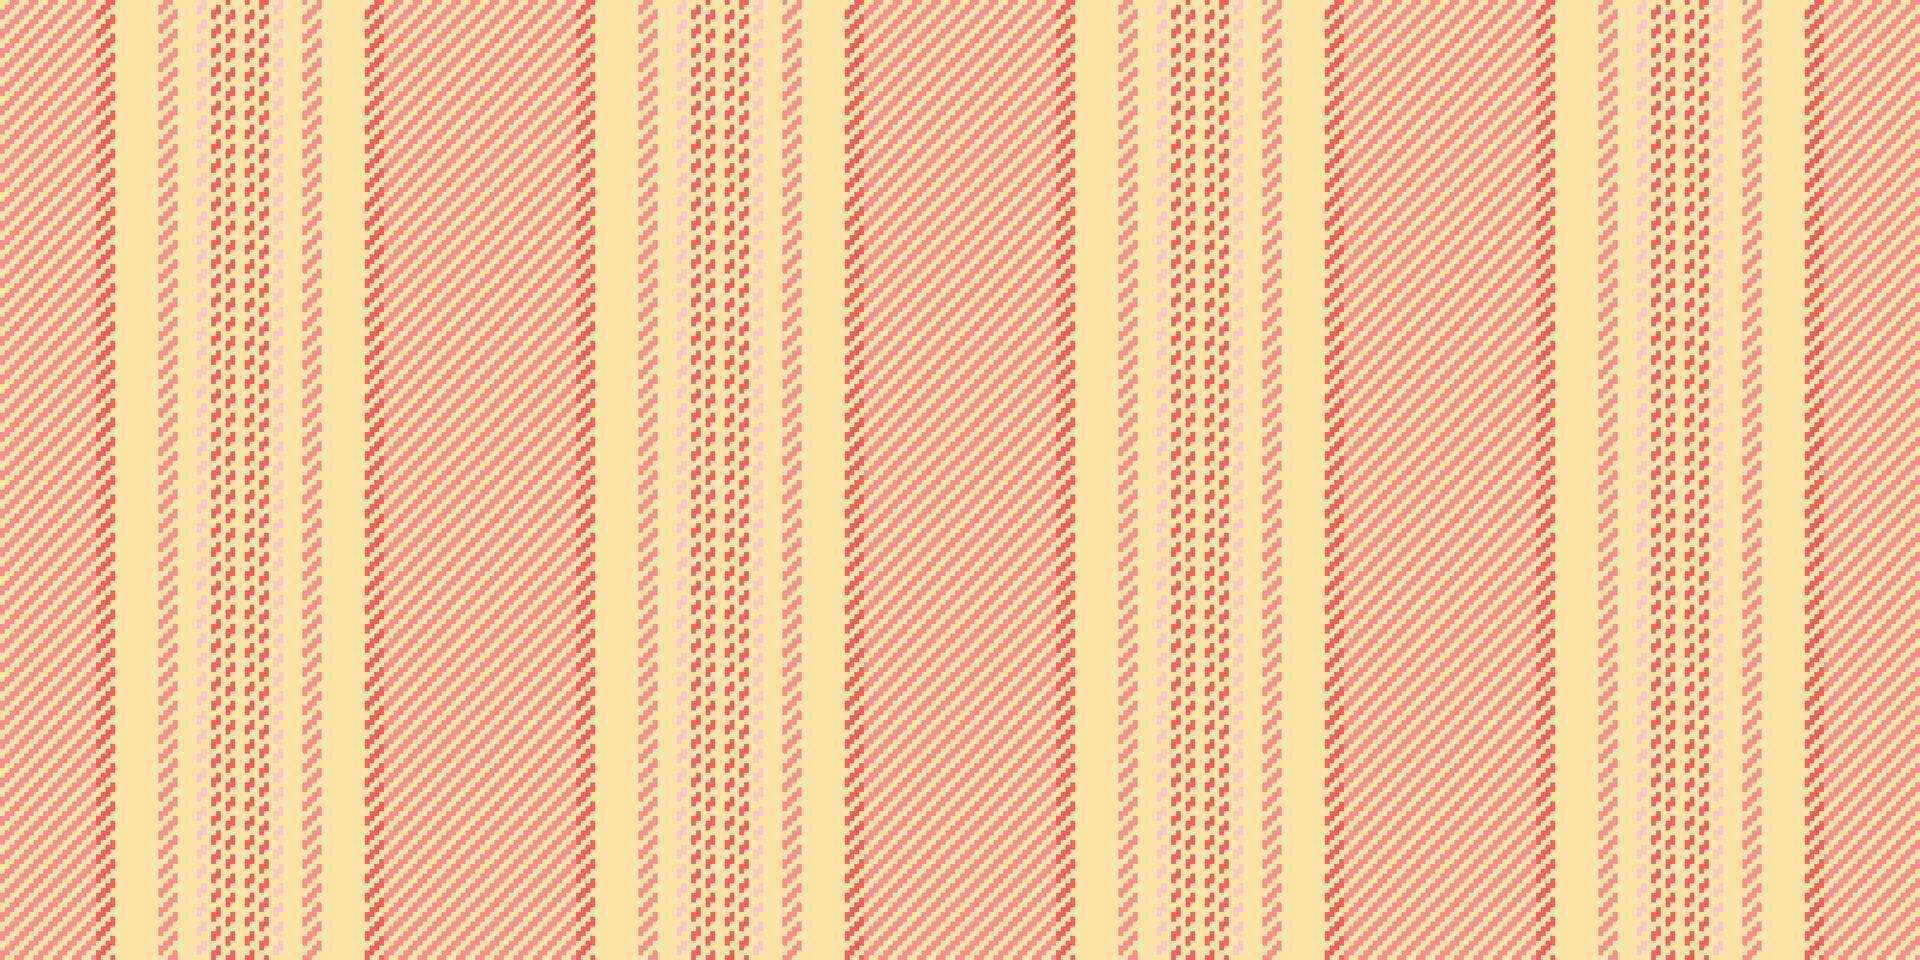 Sixties seamless vertical lines, flowing texture background pattern. Variation stripe fabric vector textile in navajo white and tulip colors.